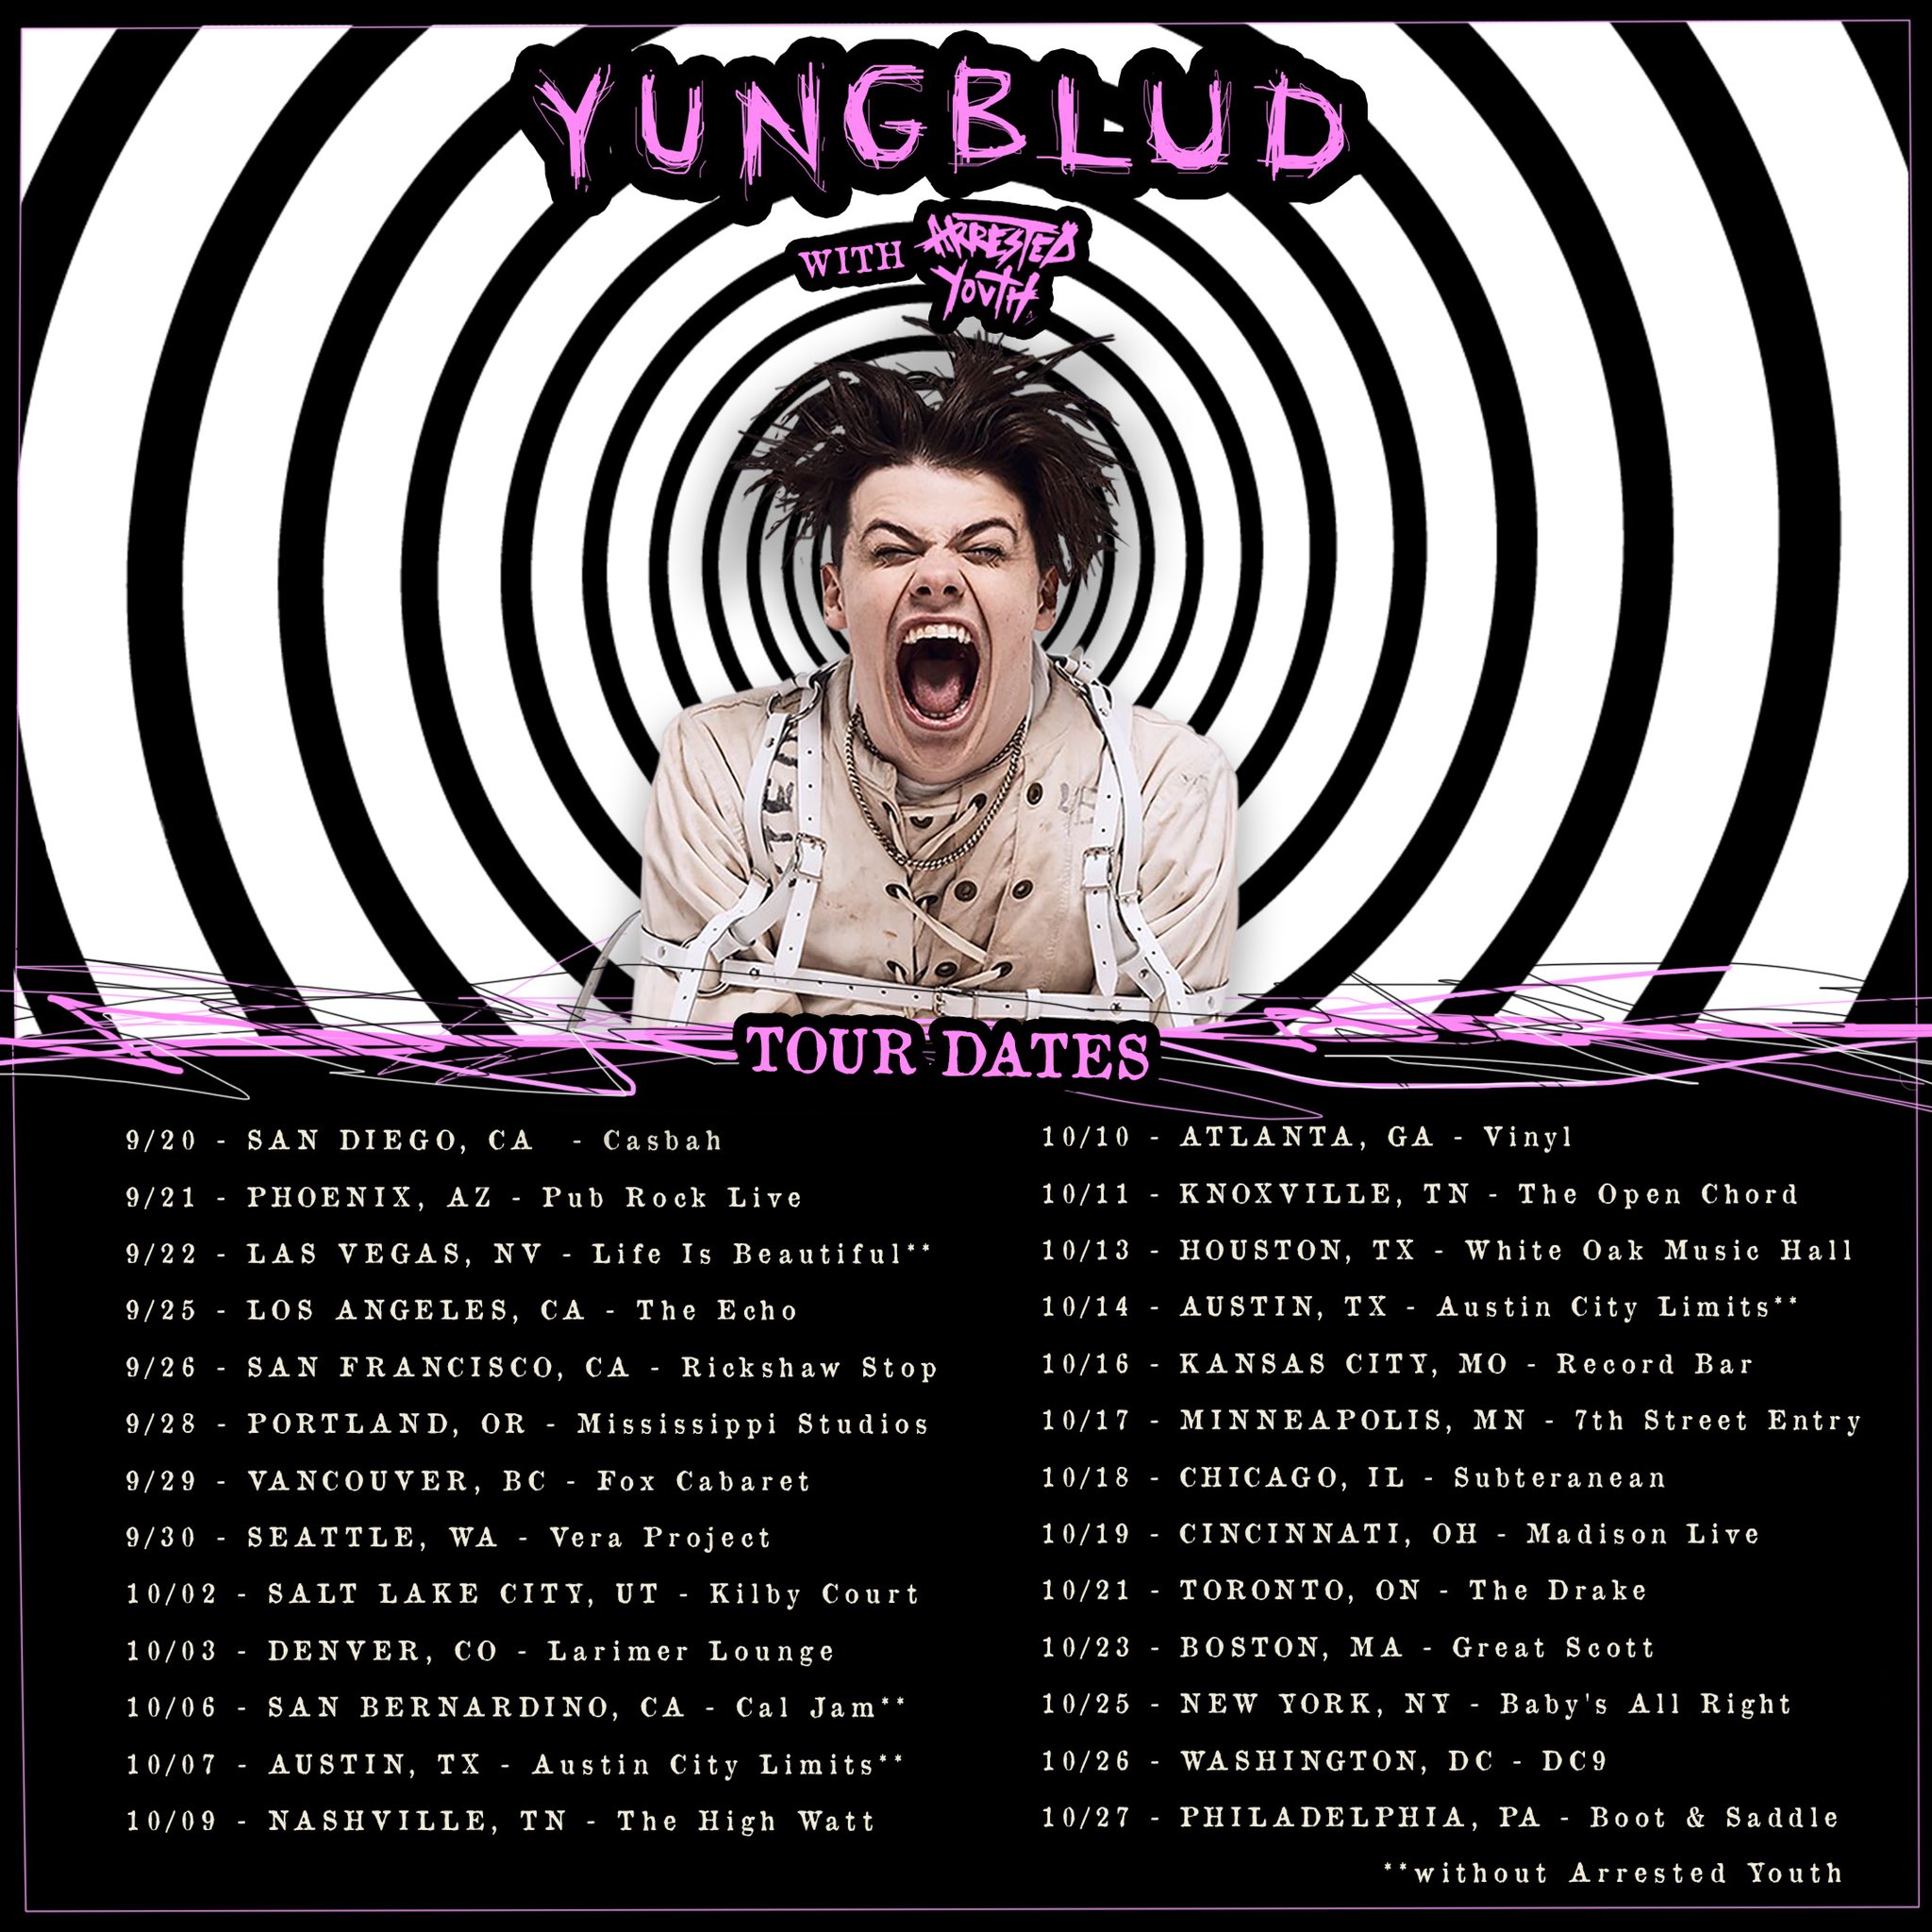 YUNGBLUD on Twitter.